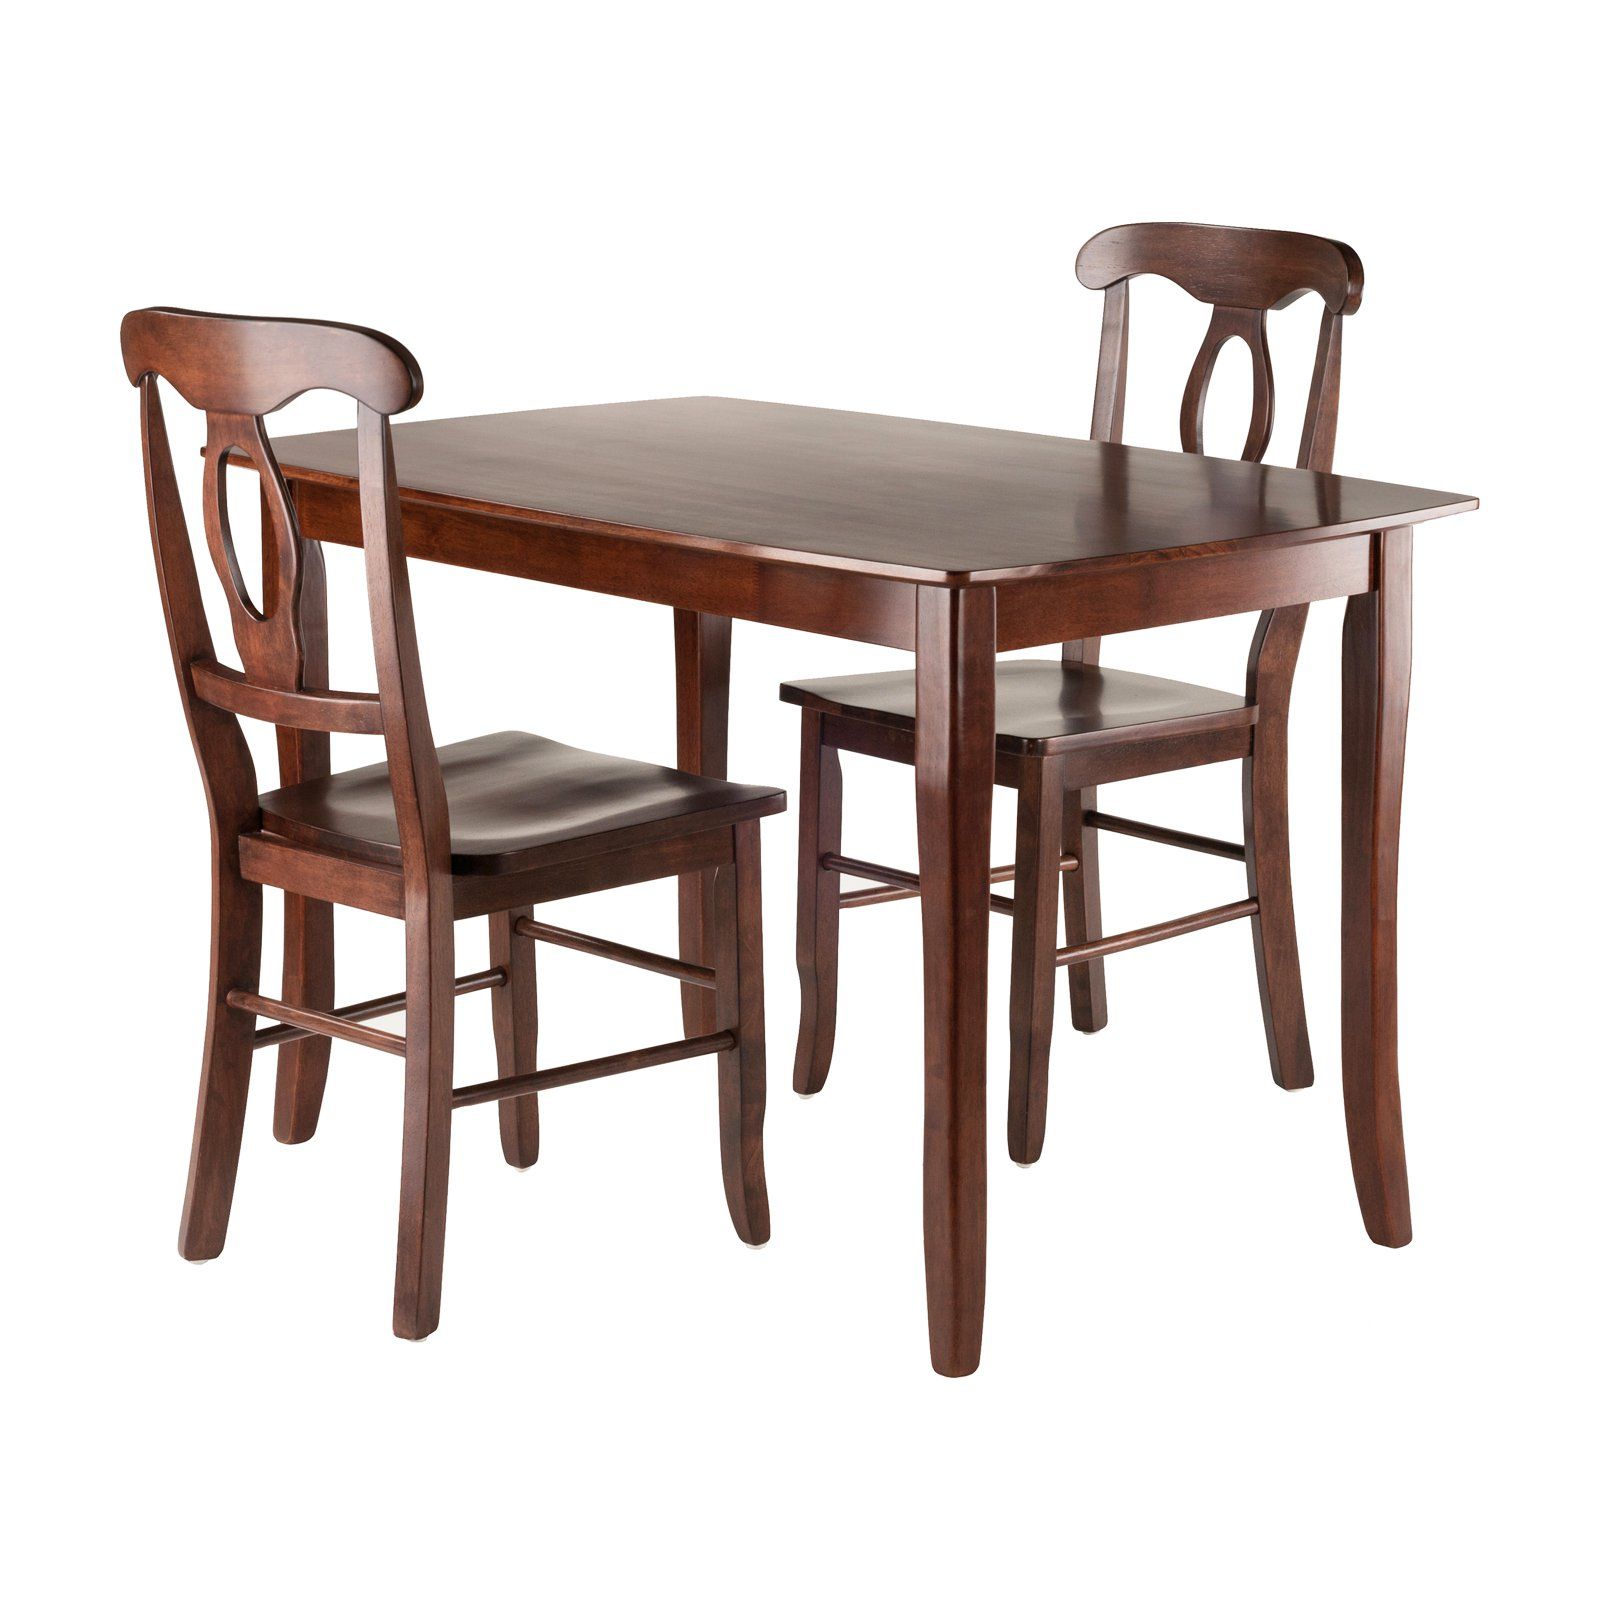 3 Pieces Dining Tables And Chair Set Throughout Current Winsome Trading Inglewood 3 Piece Dining Table Set With (View 12 of 25)